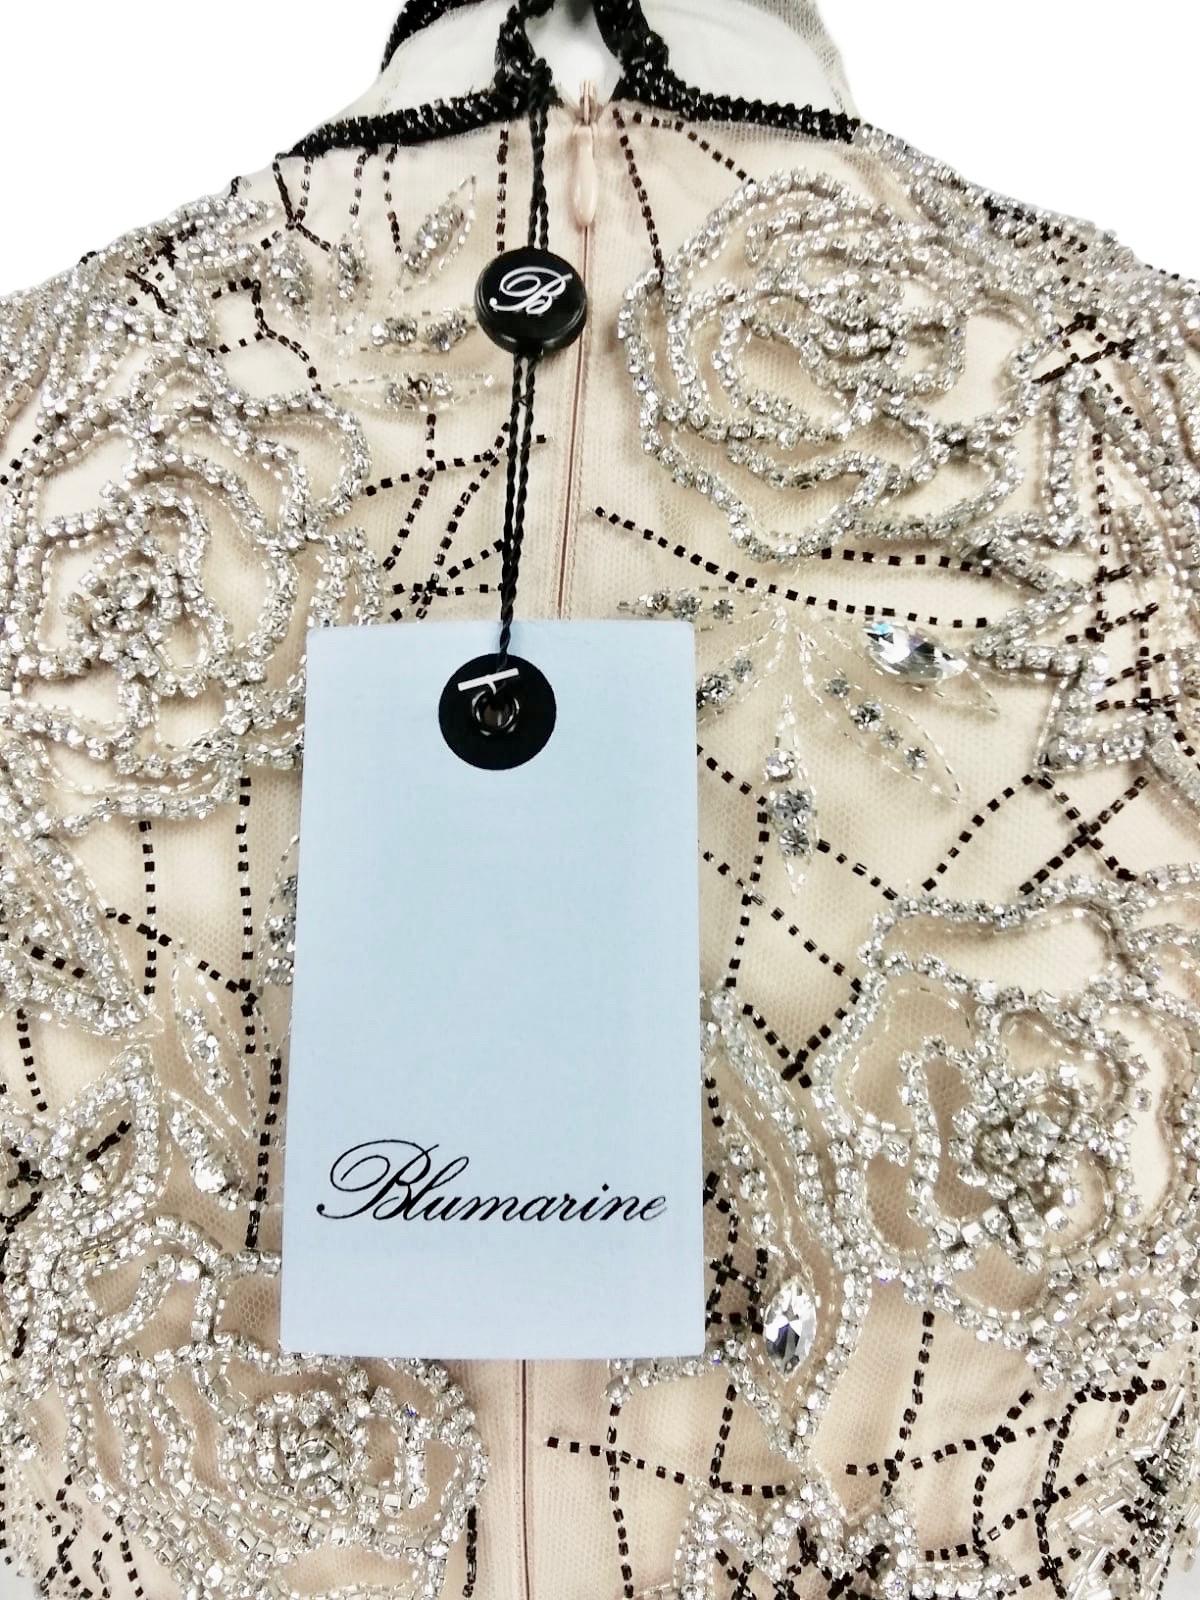 Blumarine tulle dress embroidered with beads and crystals For Sale 9